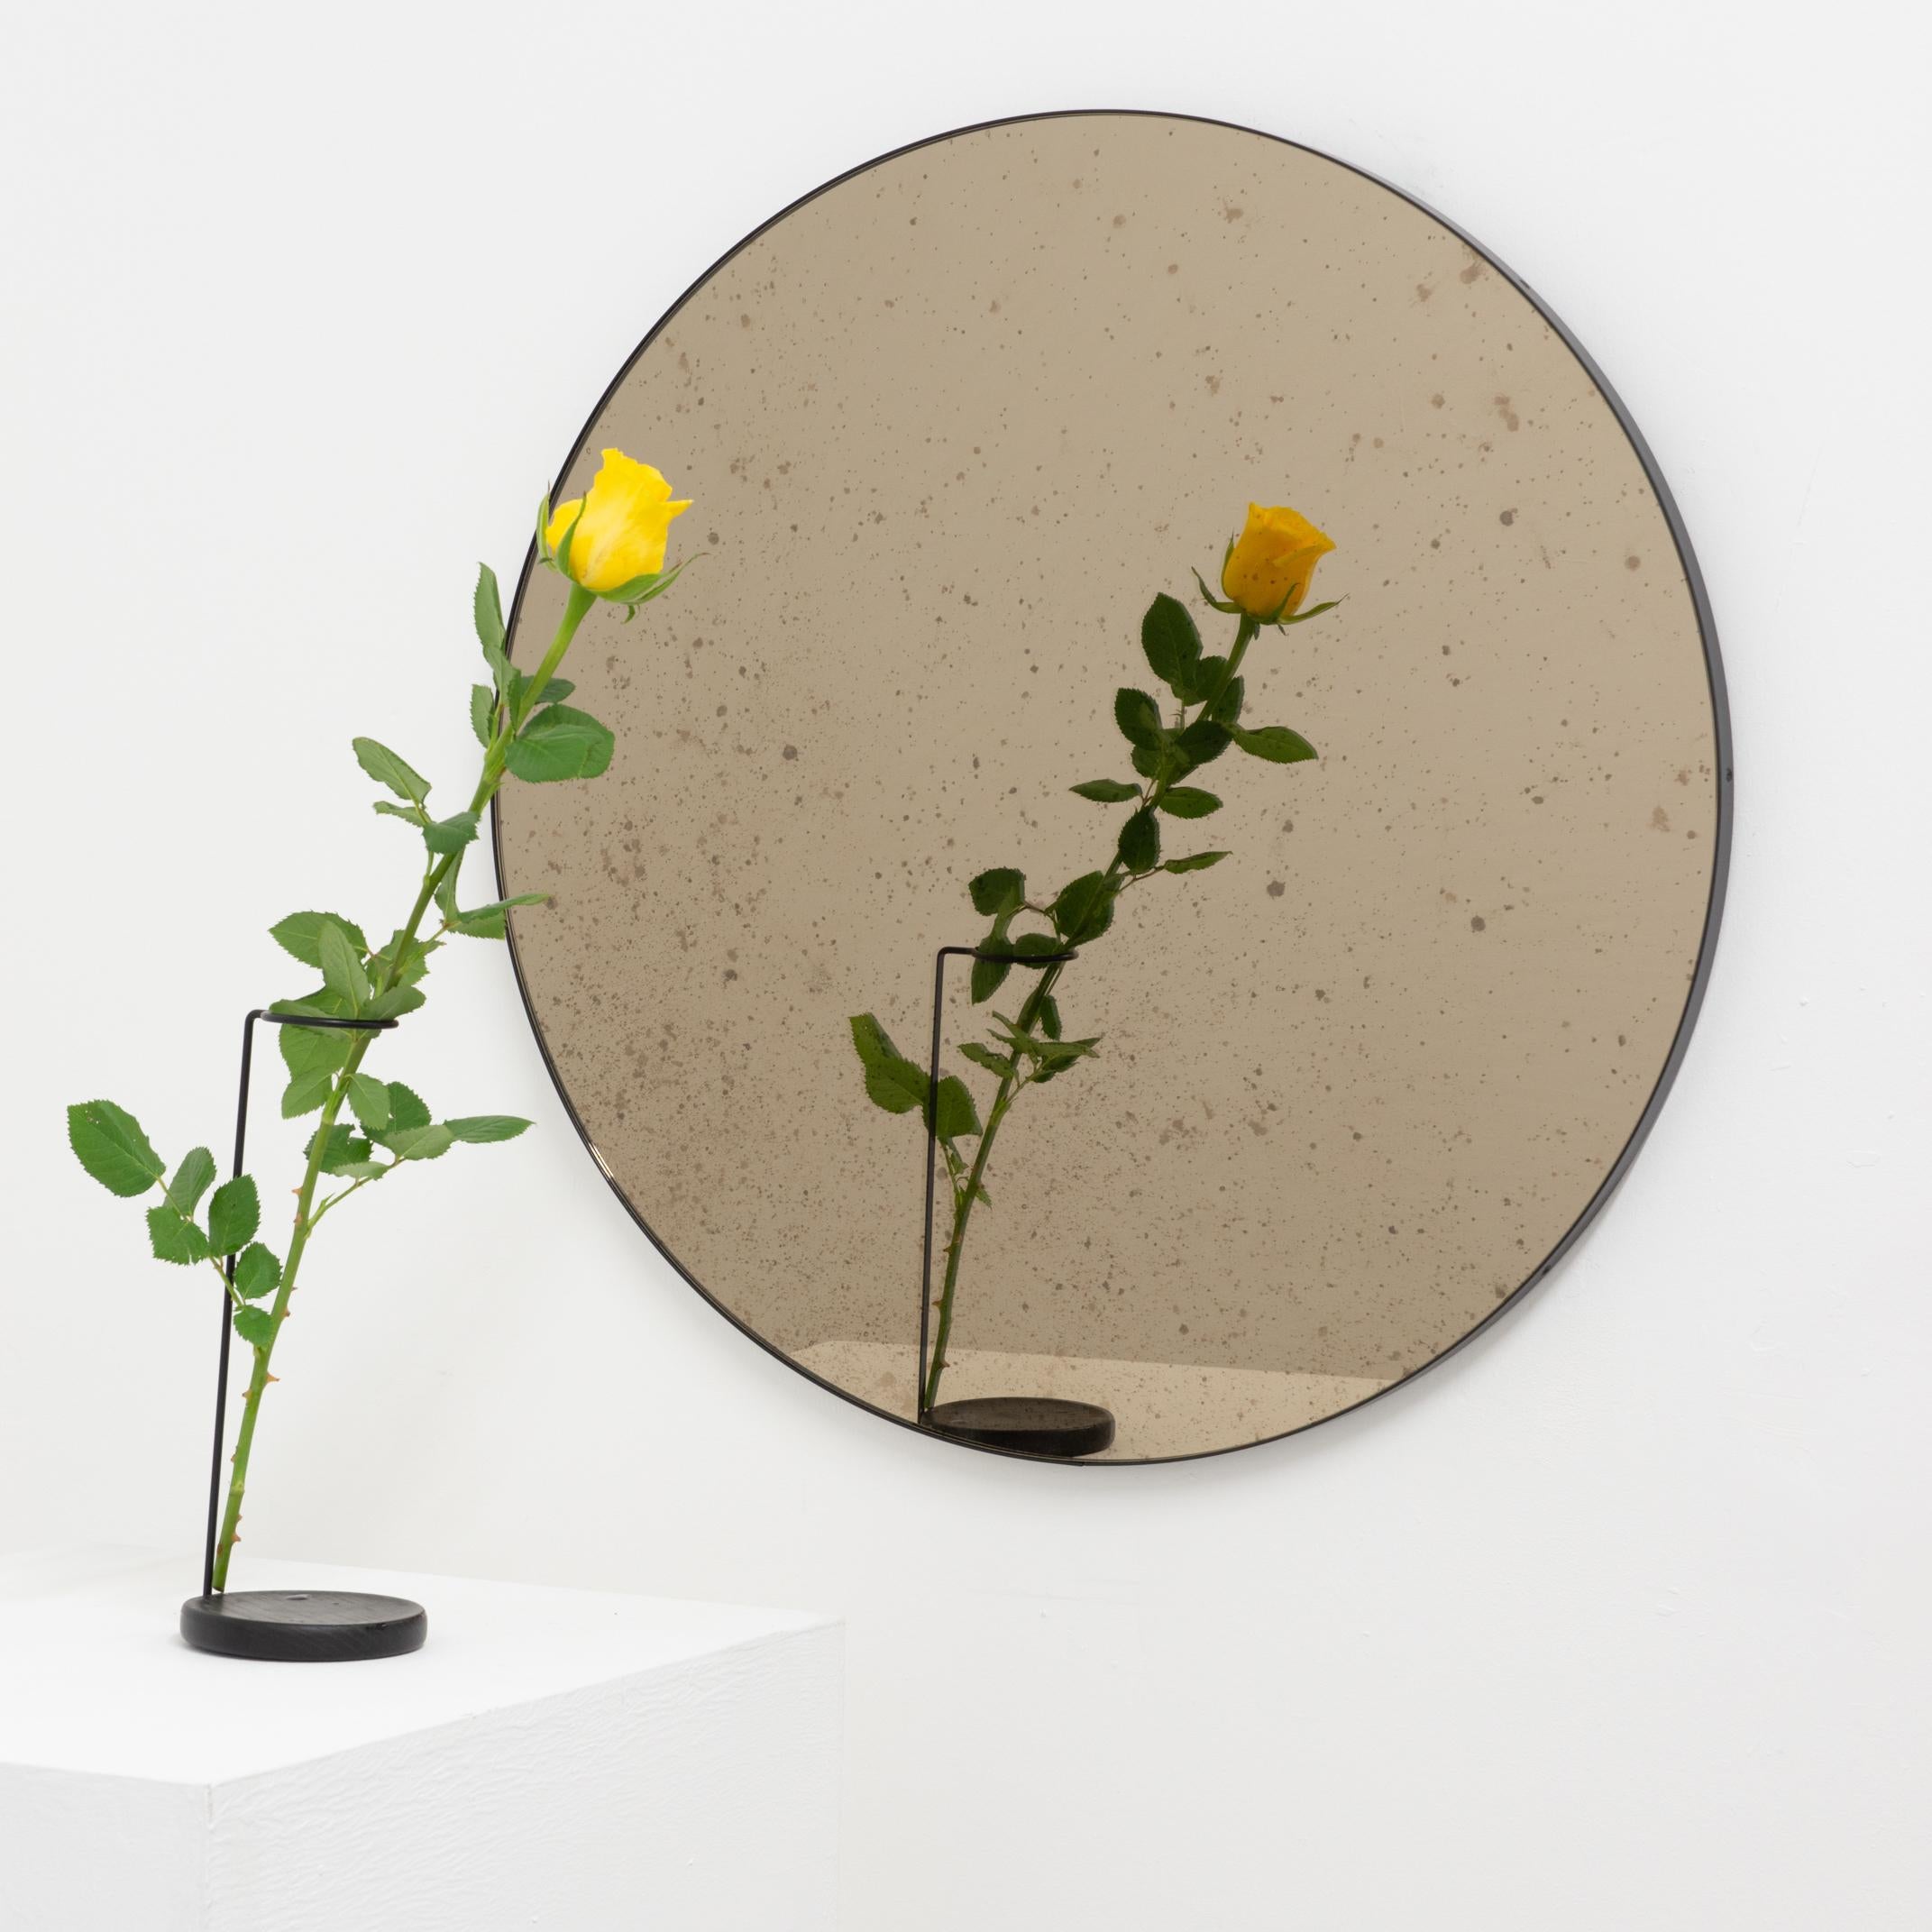 Delightful antiqued Orbis™ round bronze tinted mirror with a minimalist black aluminium powder coated frame. Designed and handcrafted in London, UK.

Medium, large and extra-large mirrors (60, 80 and 100cm) are fitted with an ingenious French cleat